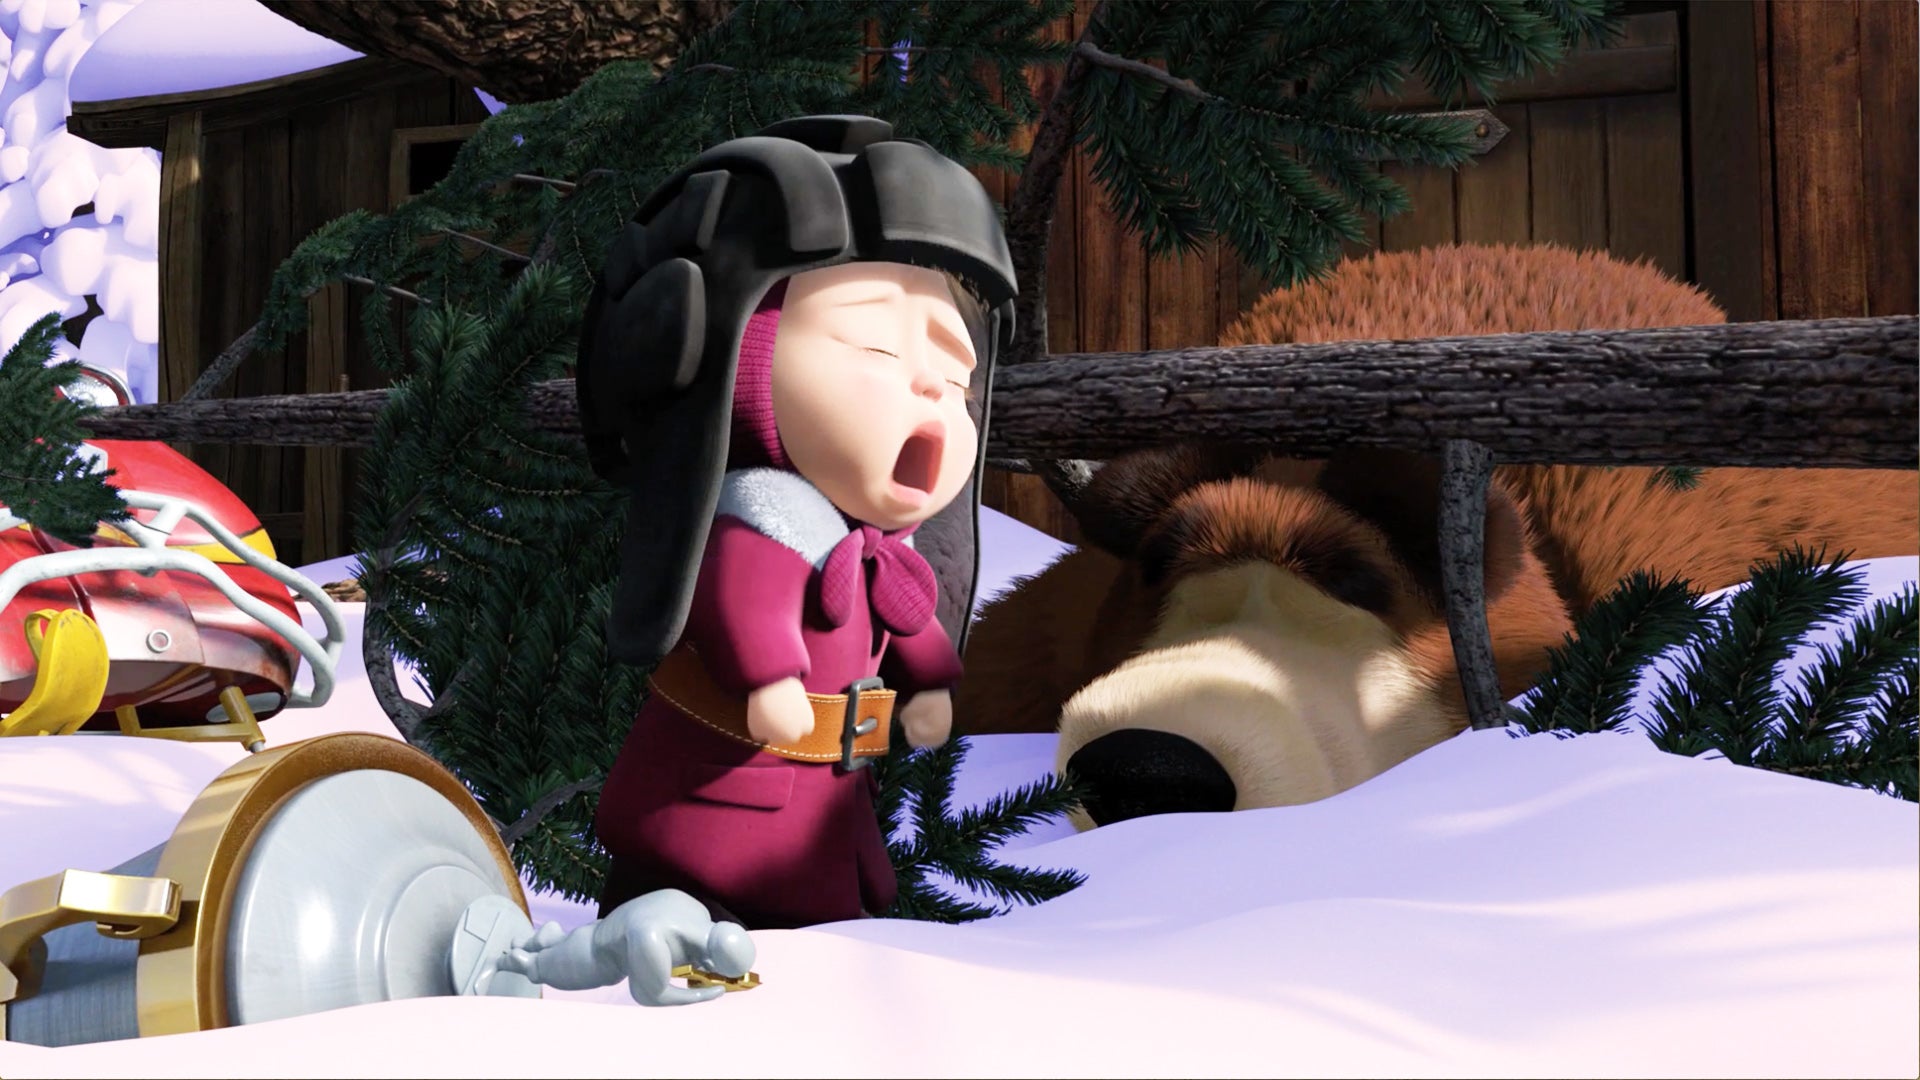 Watch Masha And The Bear Season 1 Episode 14 Watch Out Watch Full Episode Onlinehd On 